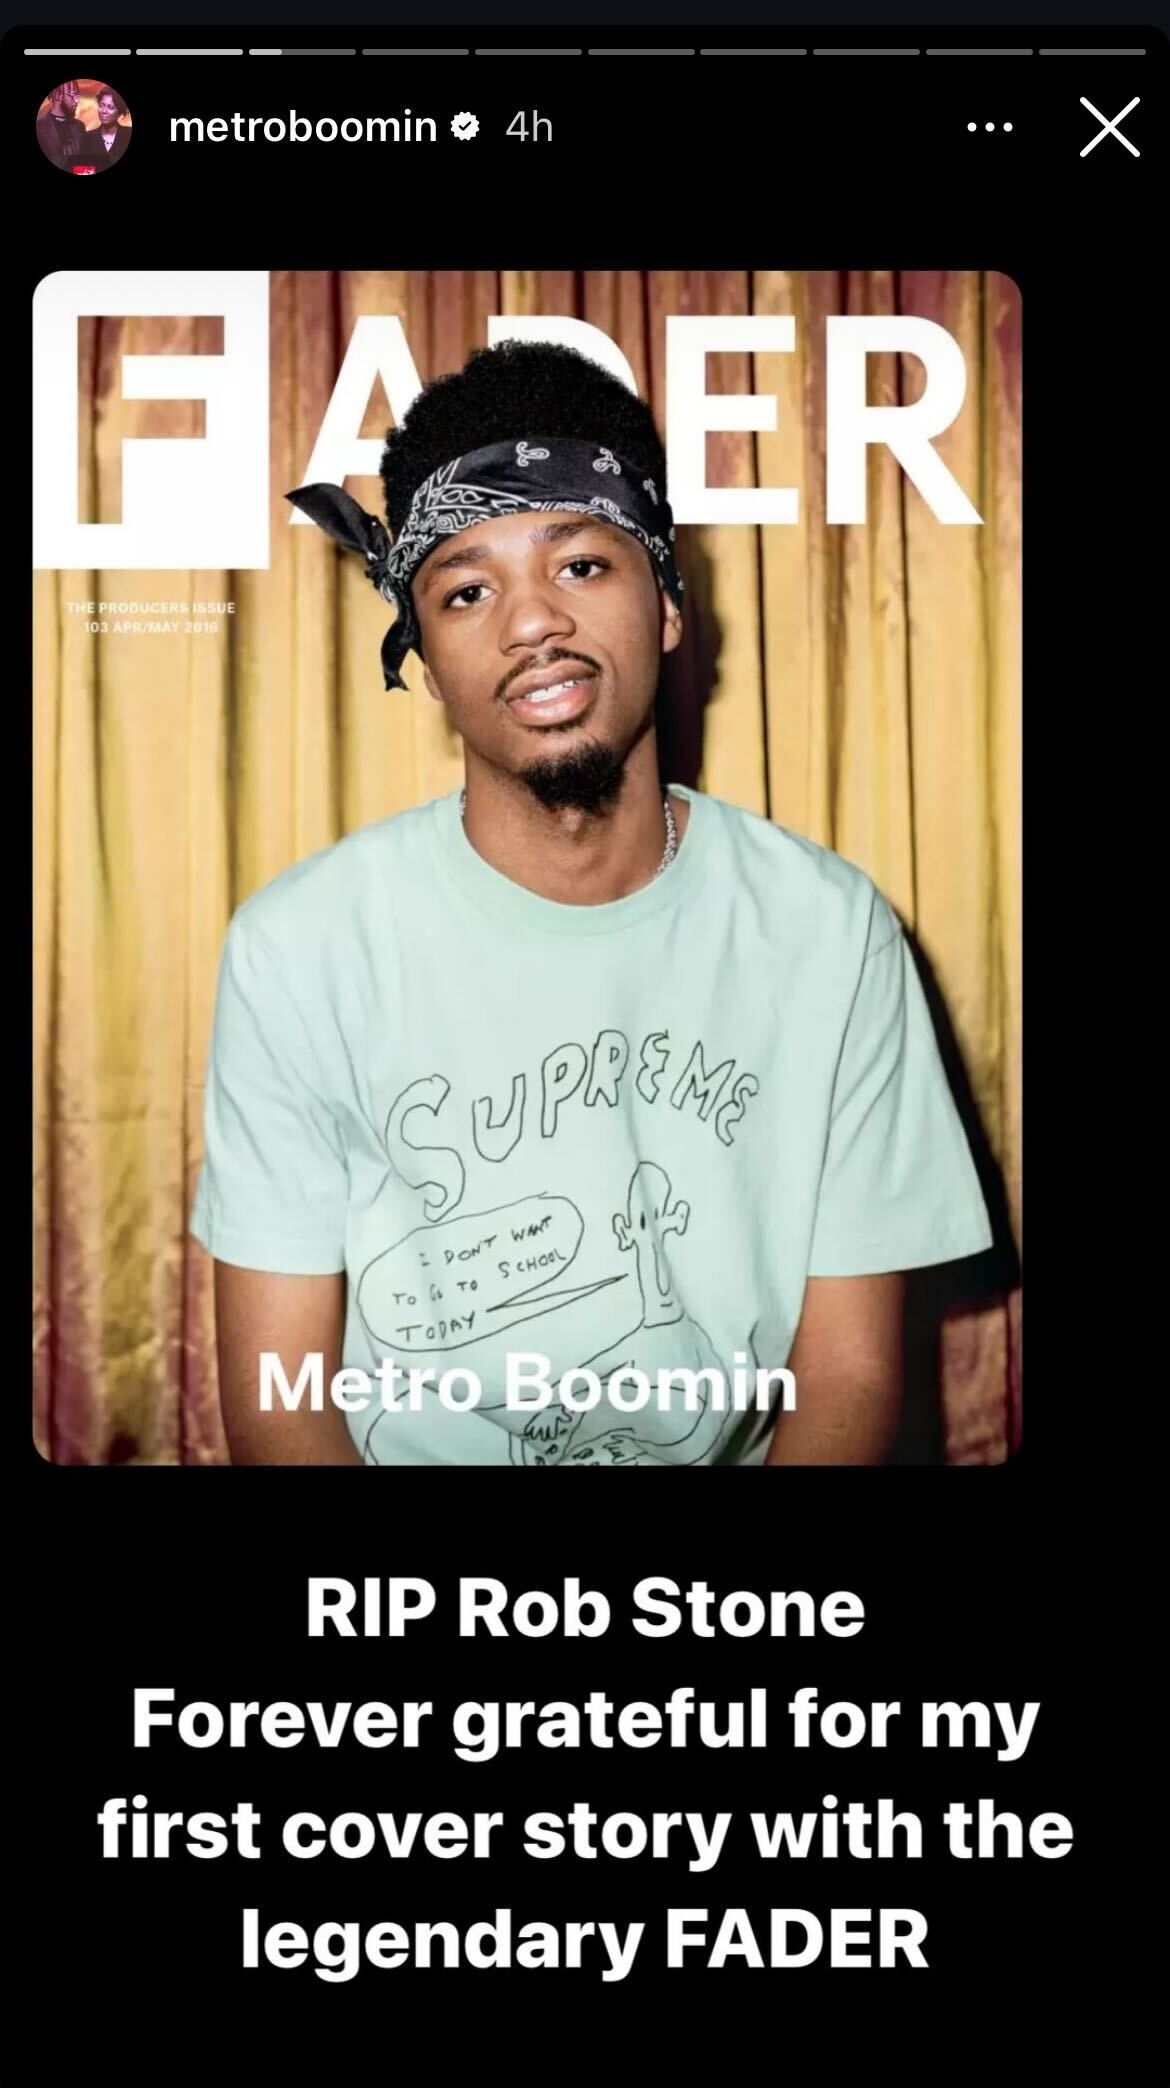 Metro Boomin on the cover of FADER magazine. Text below reads: &quot;RIP Rob Stone. Forever grateful for my first cover story with the legendary FADER.&quot;